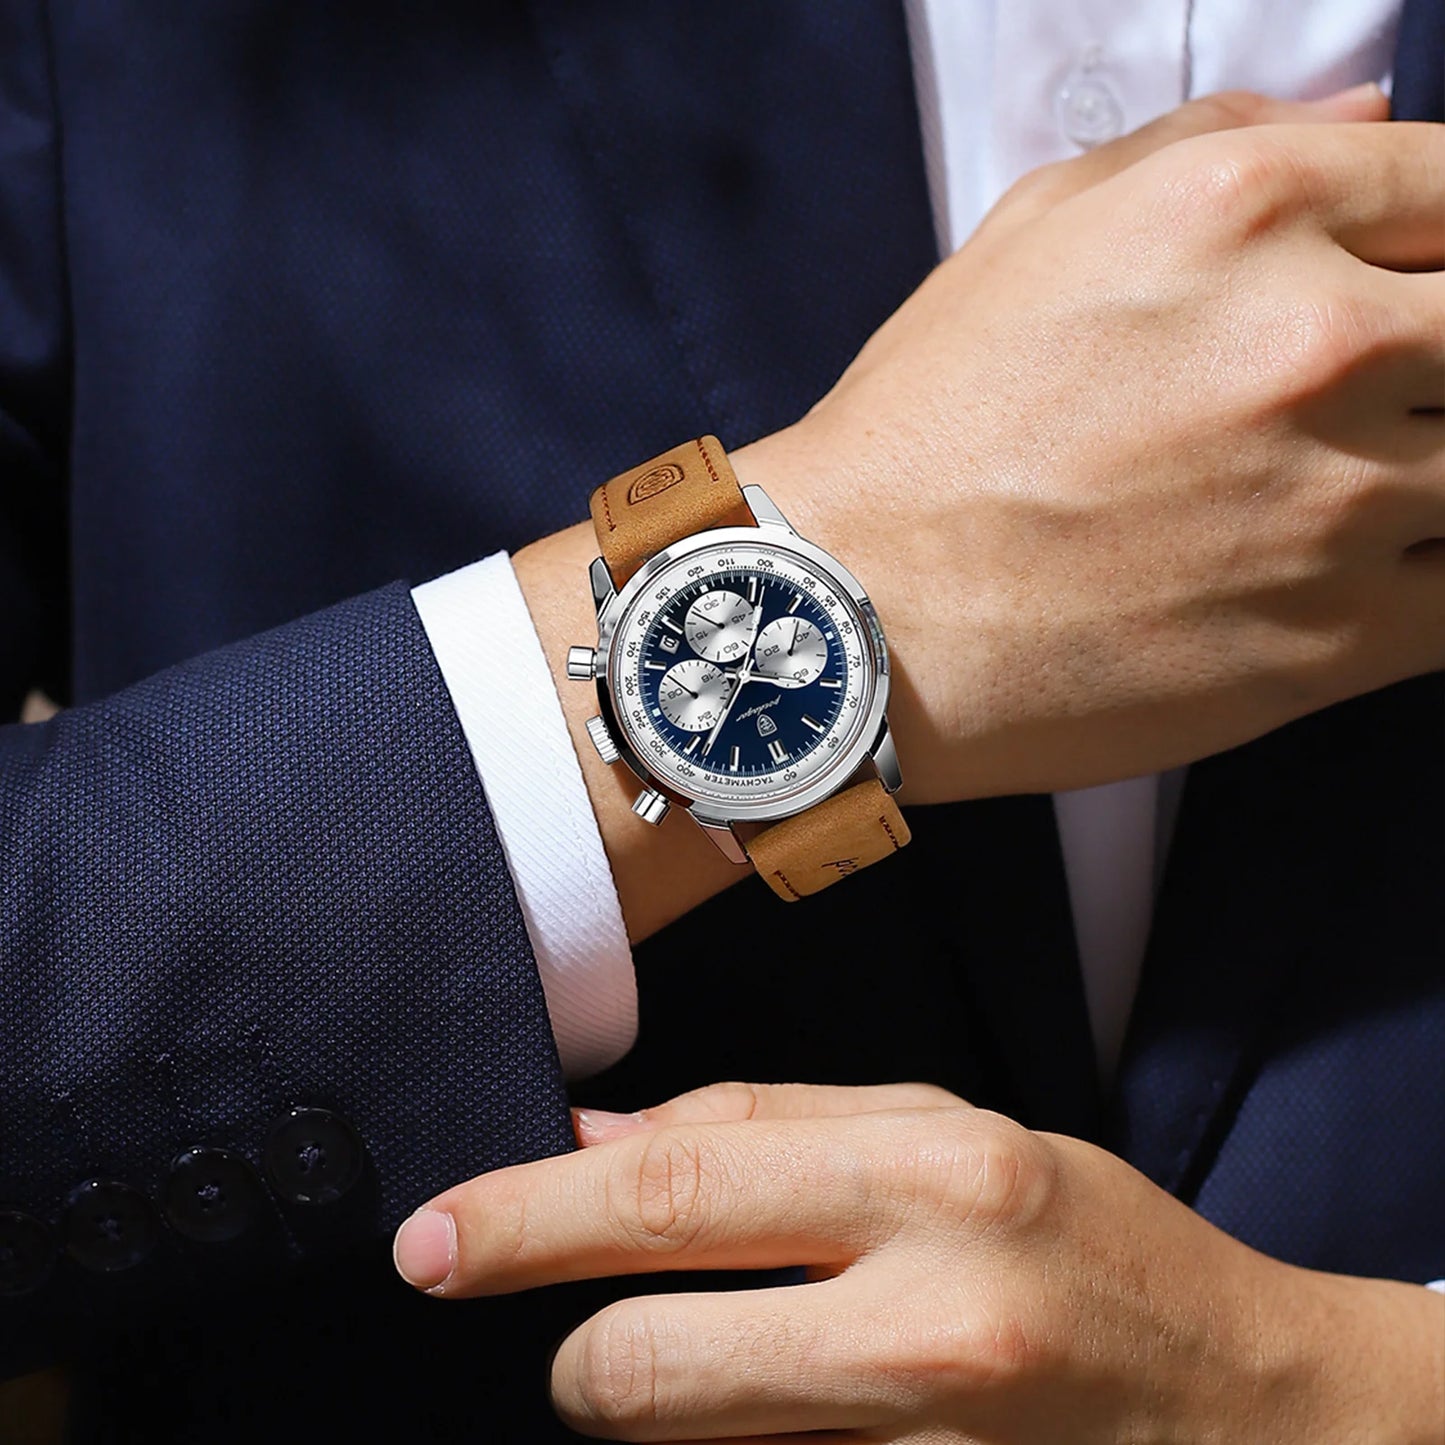 Men's Classically Sophisticated Chronograph Watch